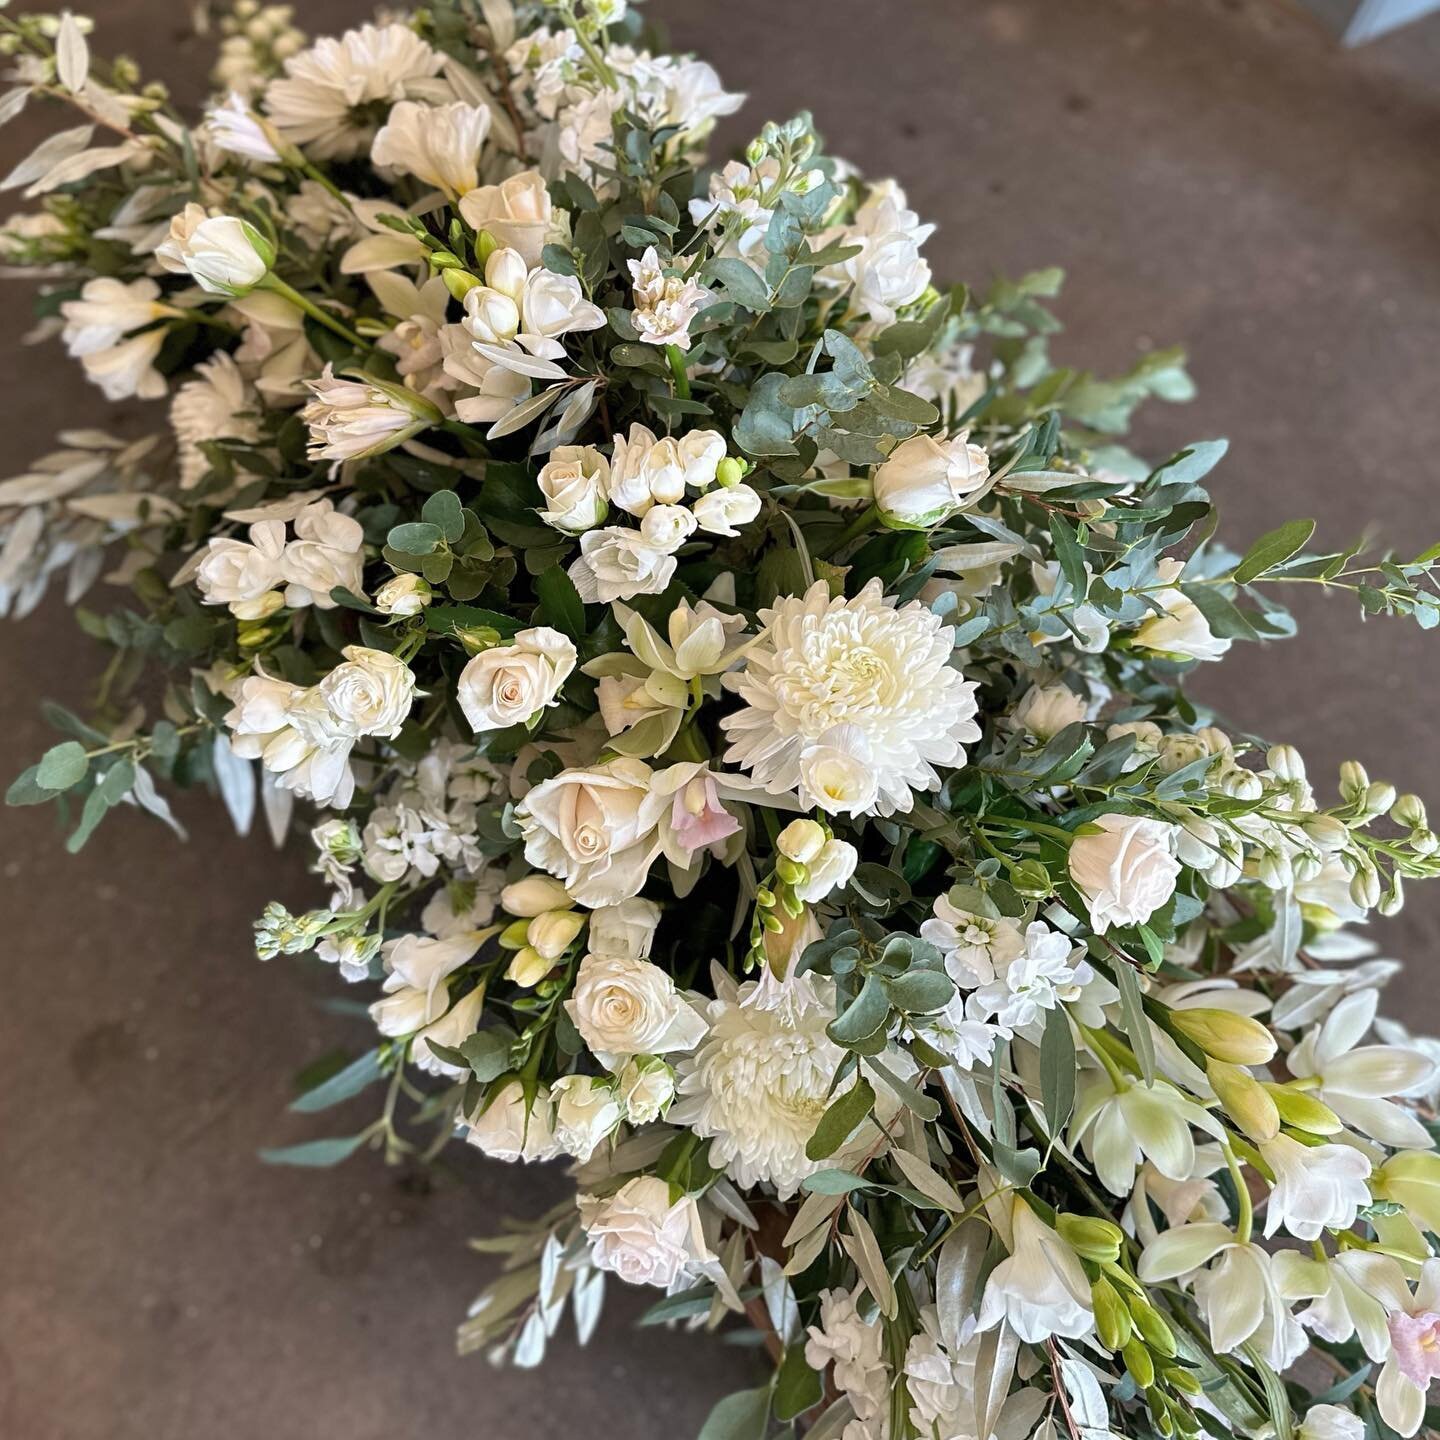 Farewell blooms for a clients special love. You can&rsquo;t really beat the classic elegance of a white traditional spray and you know we weirdos love making memorial flowers 👌